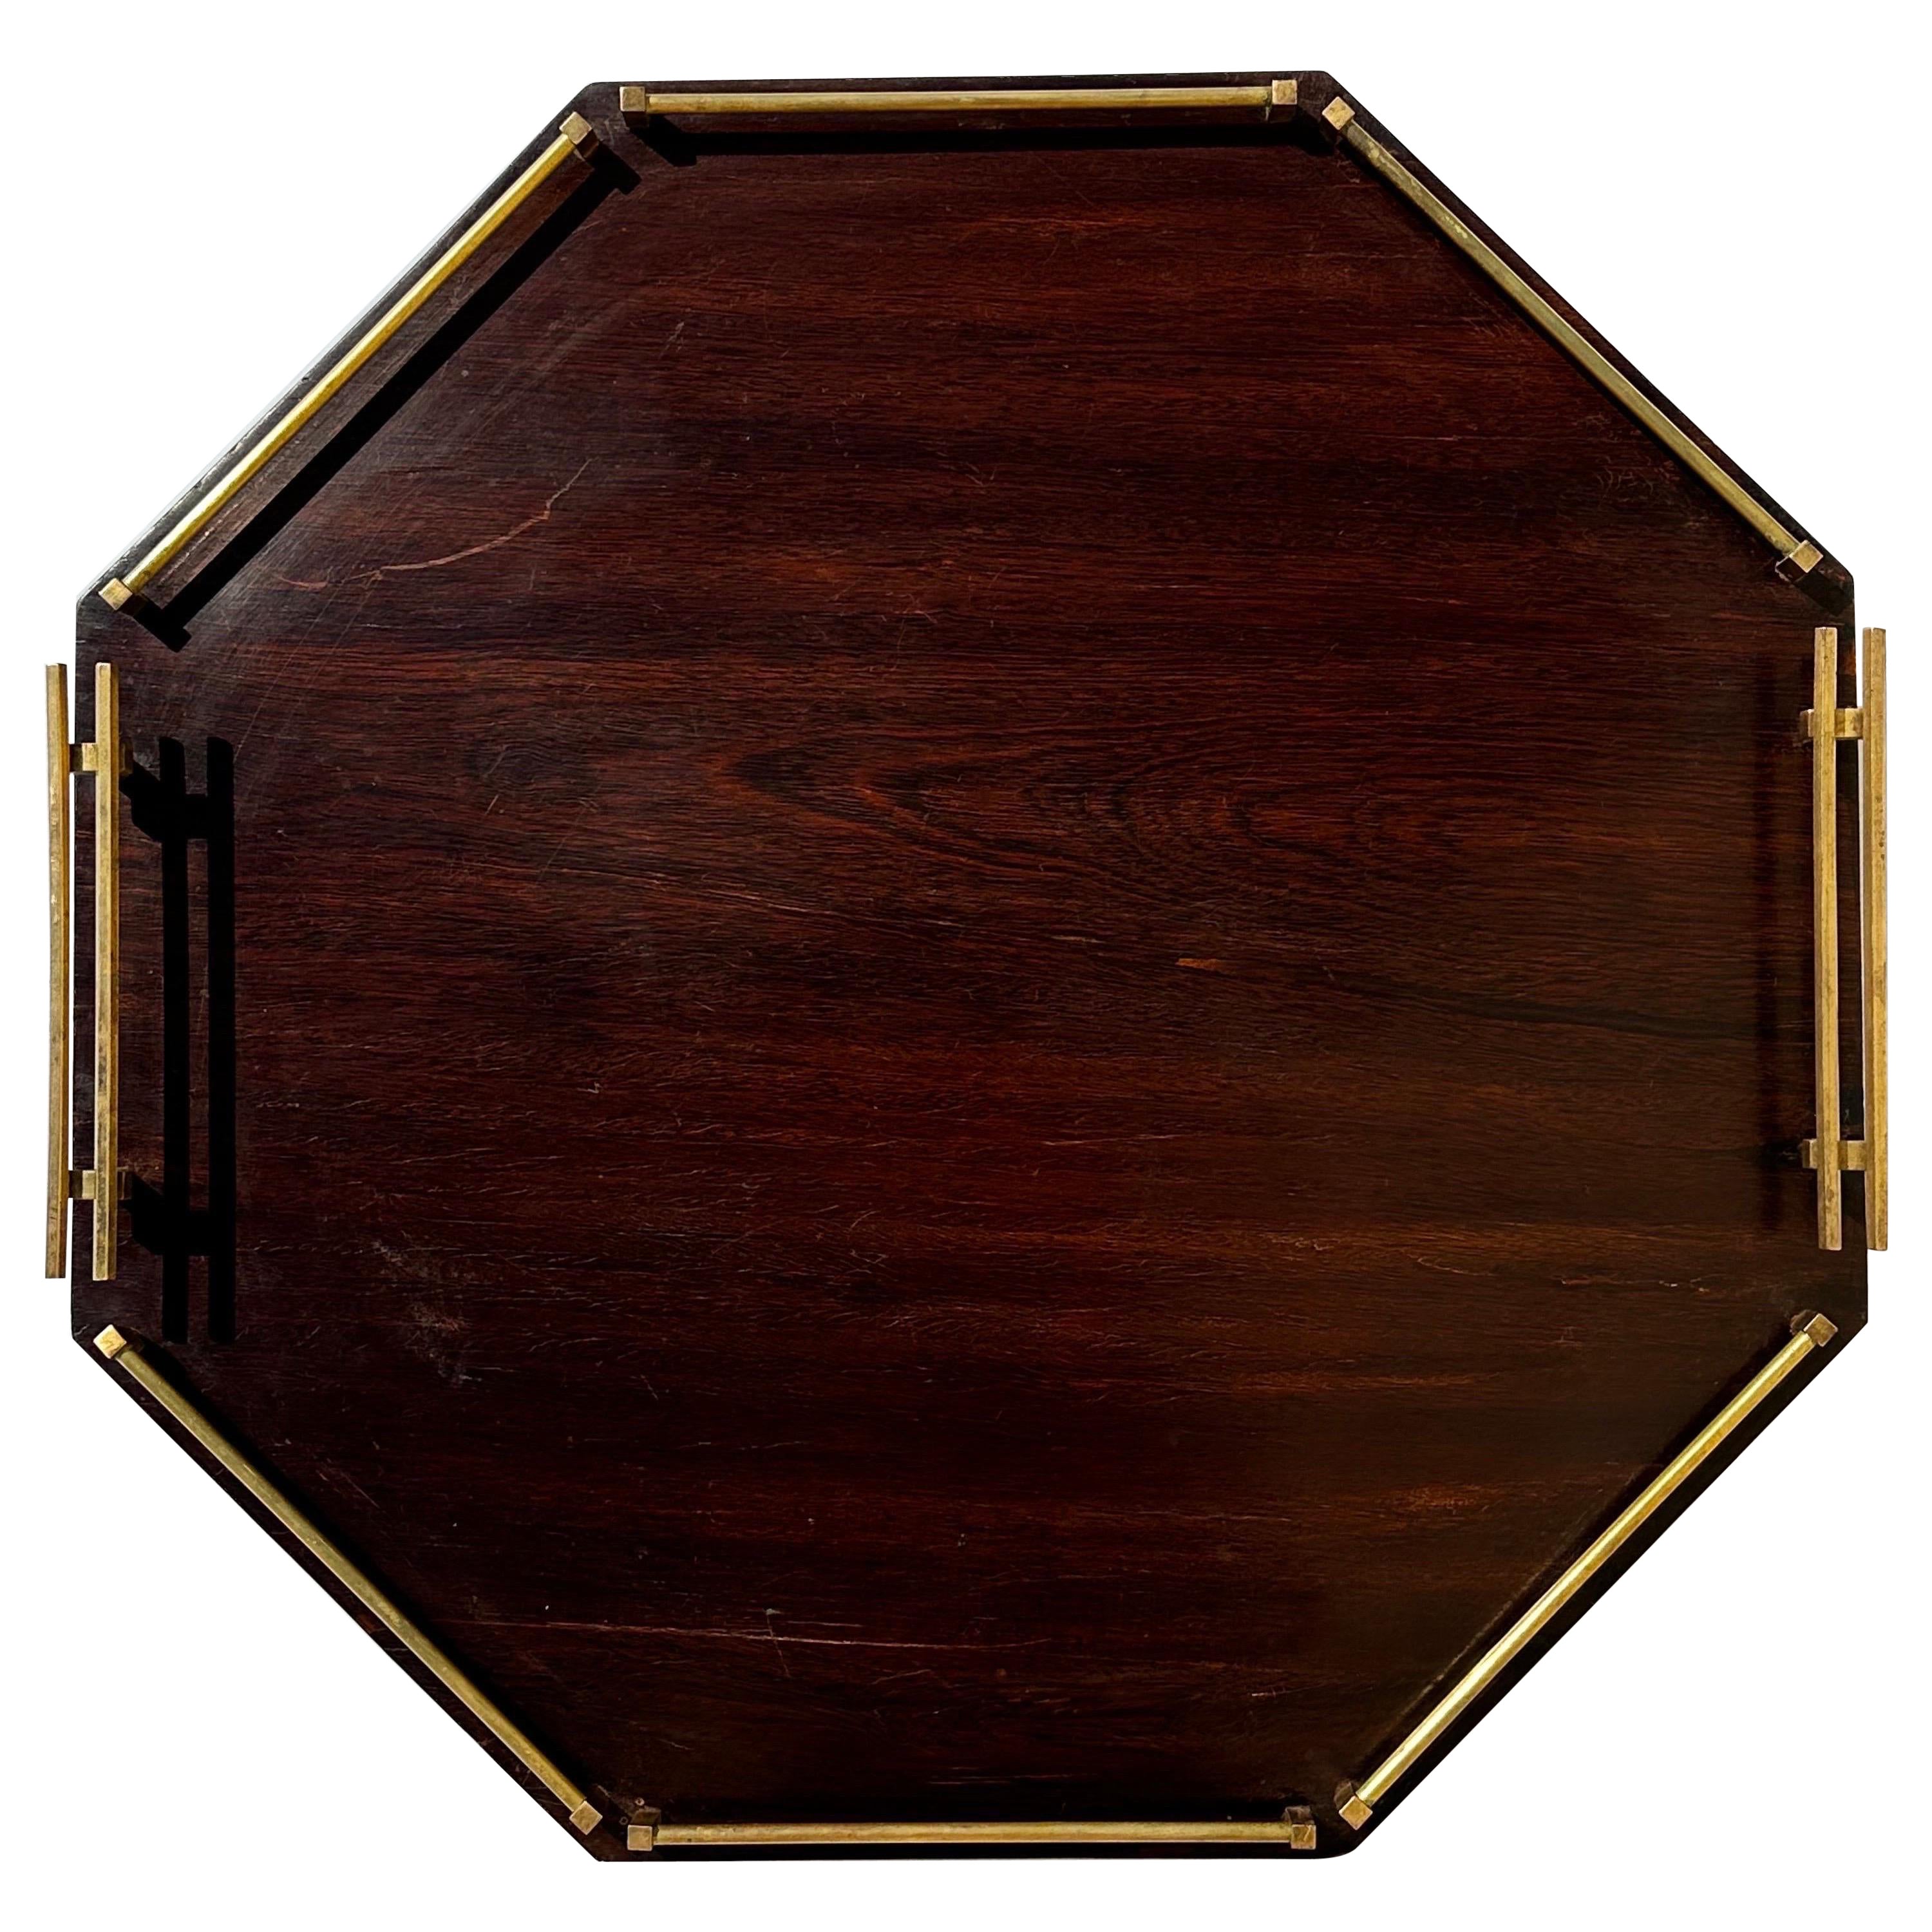 Brazilian Midcentury Jacarandá Rosewood and Brass Serving Tray, 1960s For Sale